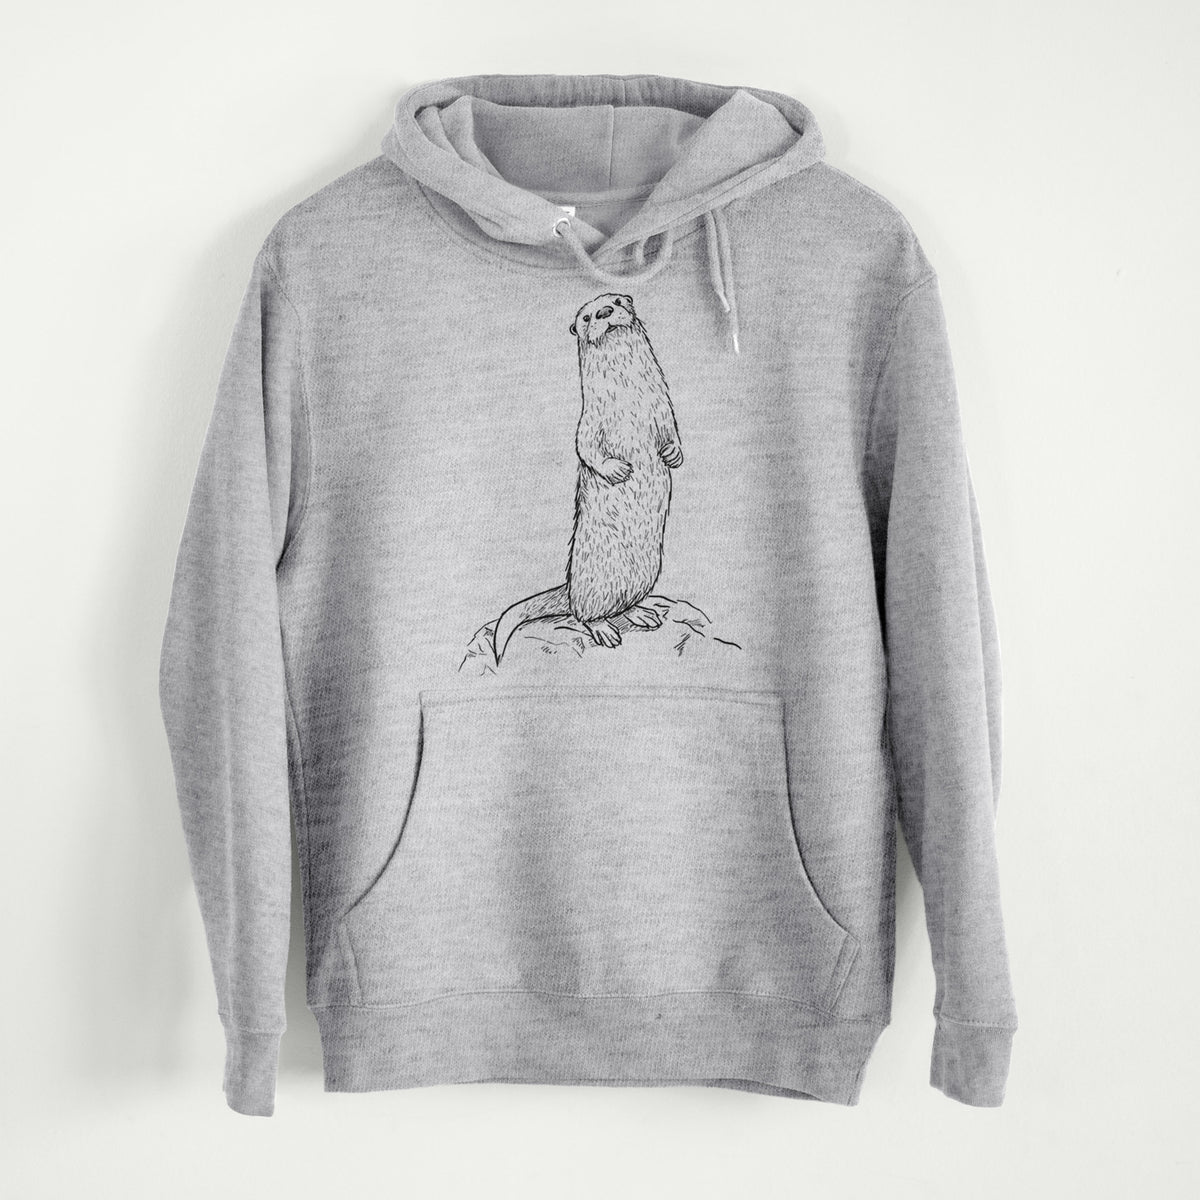 North American River Otter - Lontra canadensis  - Mid-Weight Unisex Premium Blend Hoodie